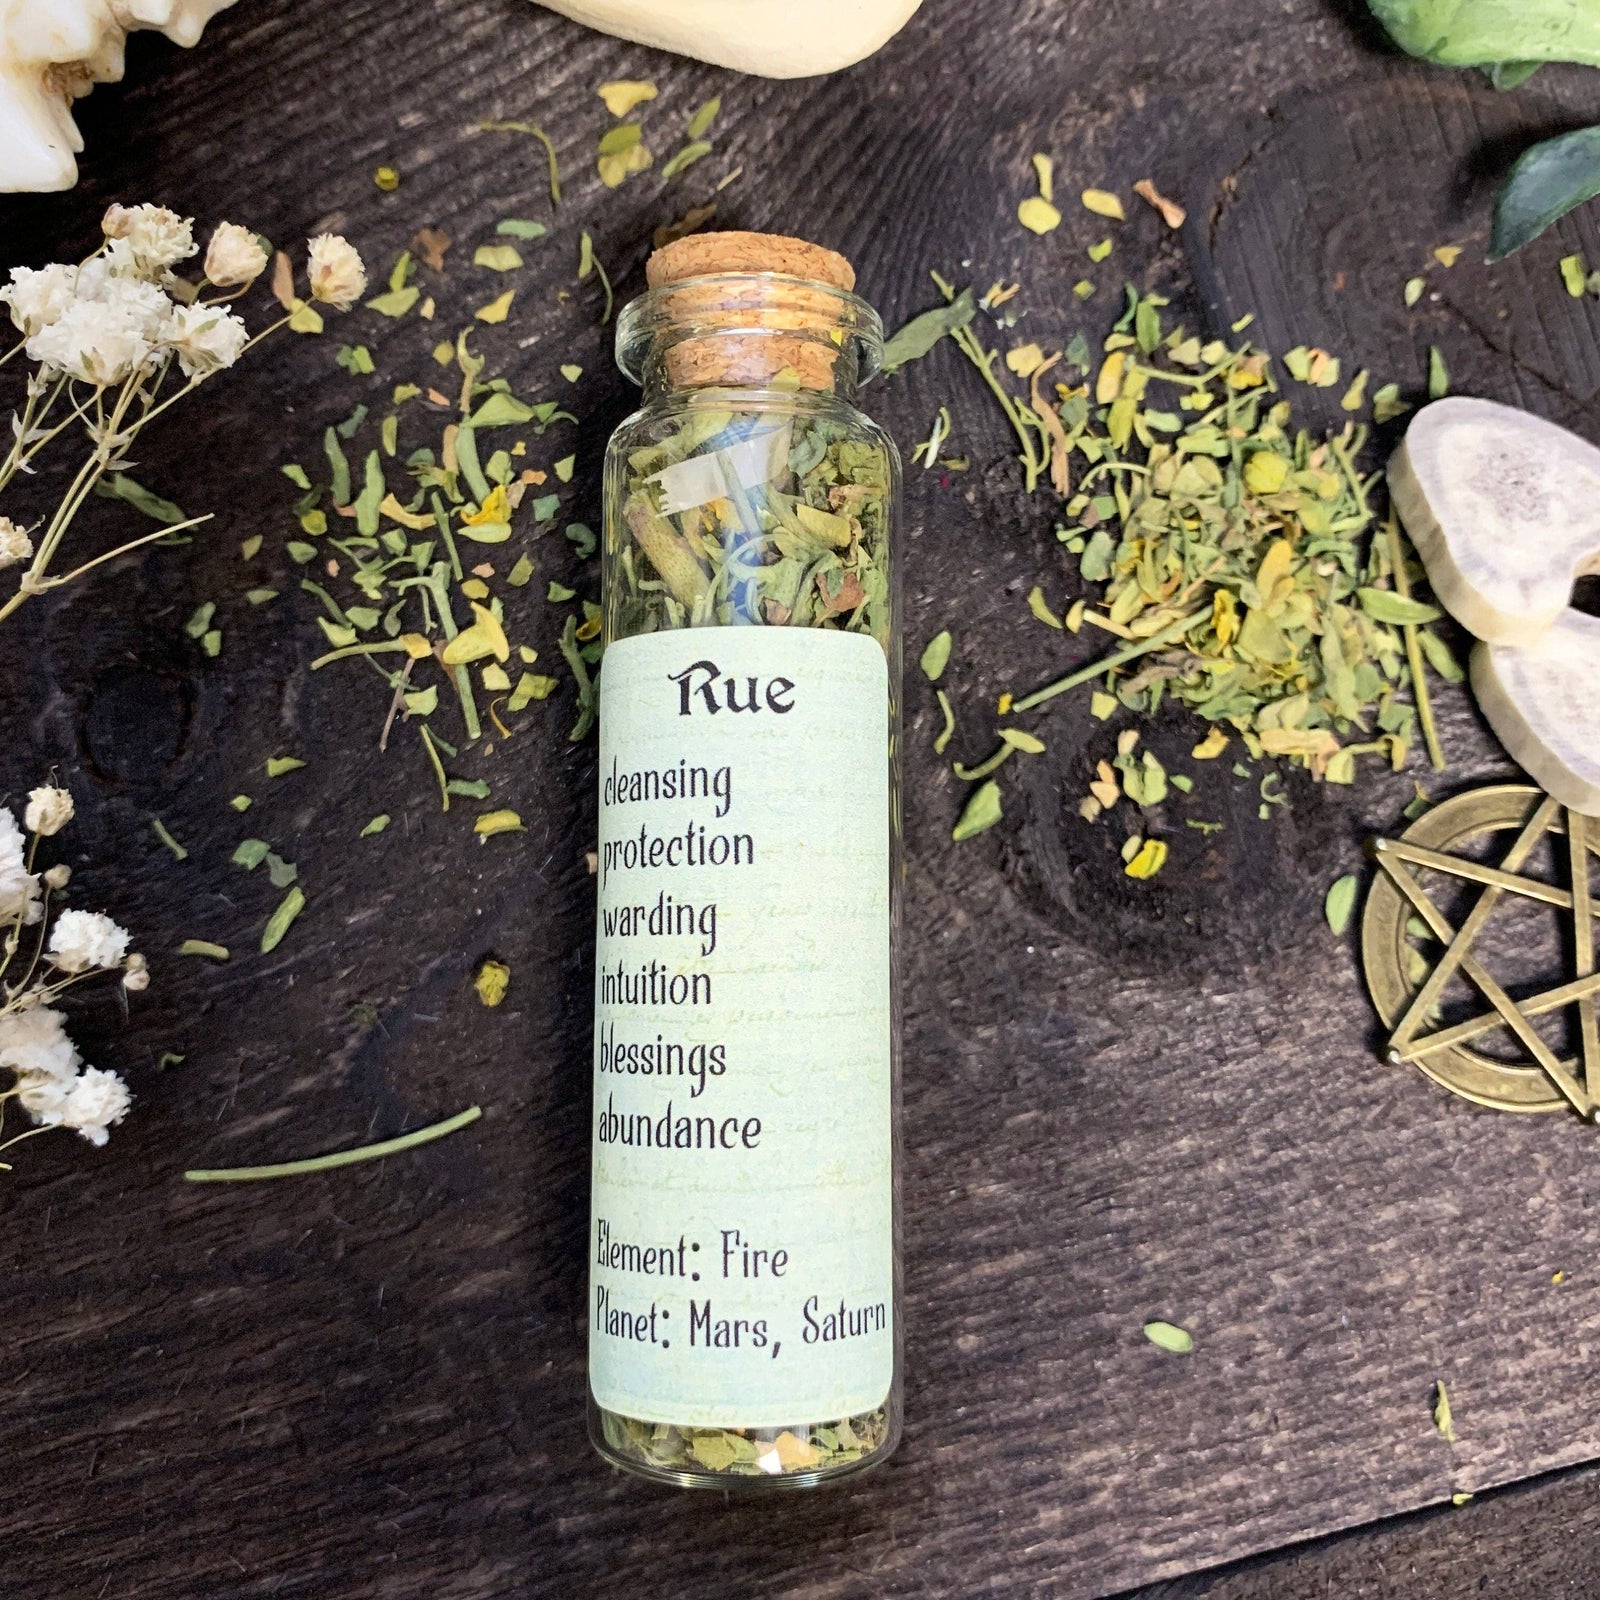 Rue Herb Bottle | Witchcraft Spell Herbs | Magical Herbs | Herb Starter Kit | Witch Herb Bottle | Apothecary Herbs | Ritual Herbs | Warding